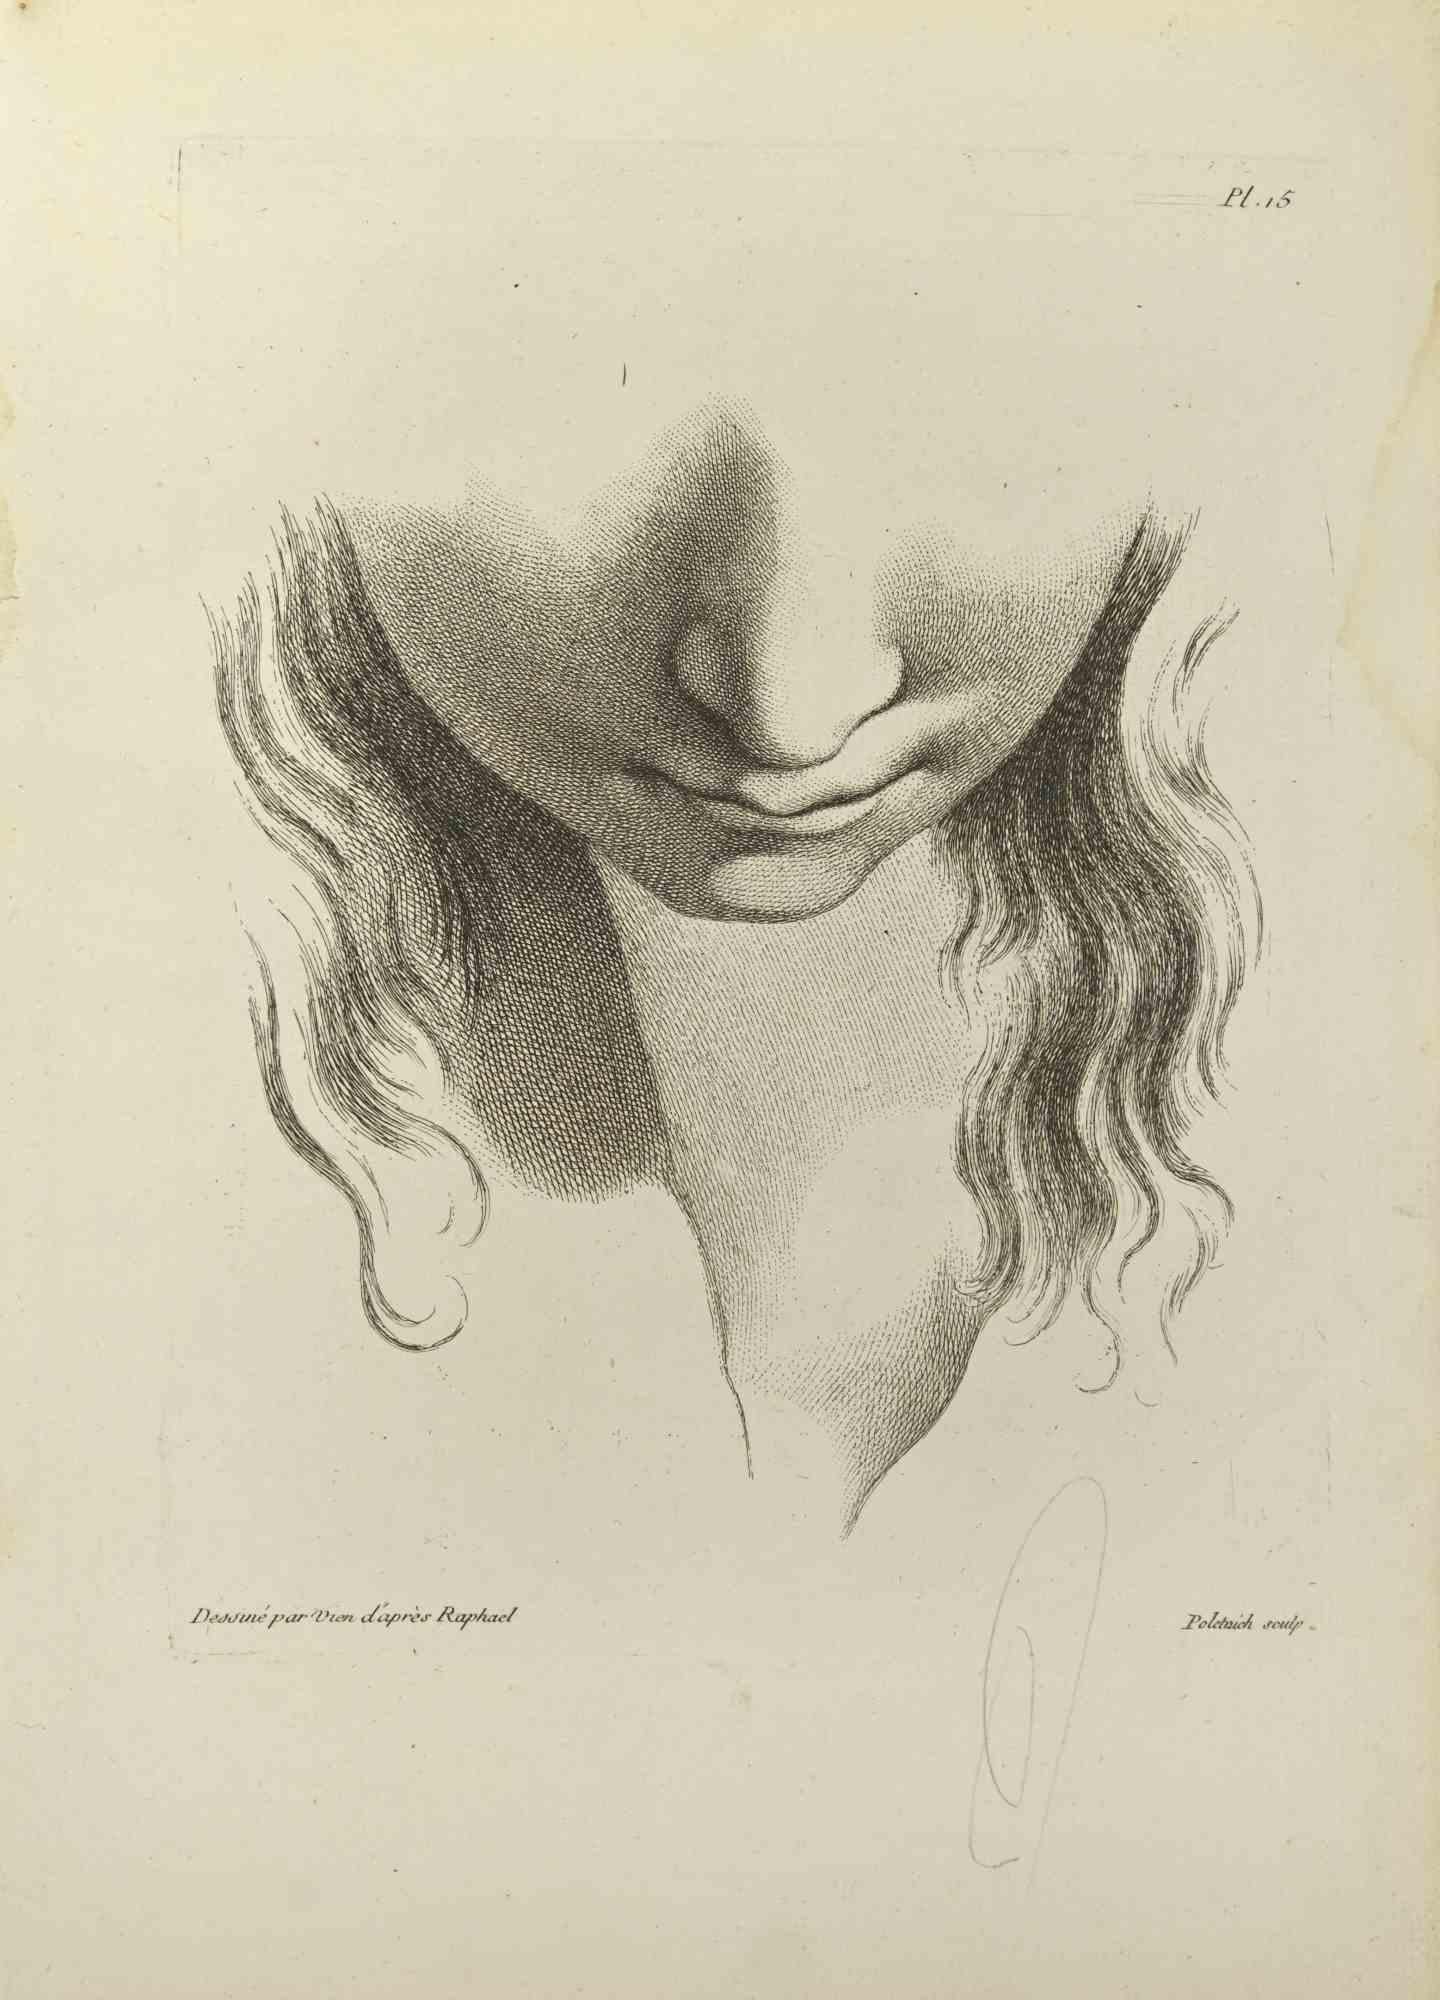 Portrait after Raphael is an etching realized by Jean Francois Poletnich in 1755.

Signed in the plate.

Good conditions with foxing and folding.

The artwork is depicted through confident strokes.

The etching was realized for the anatomy study